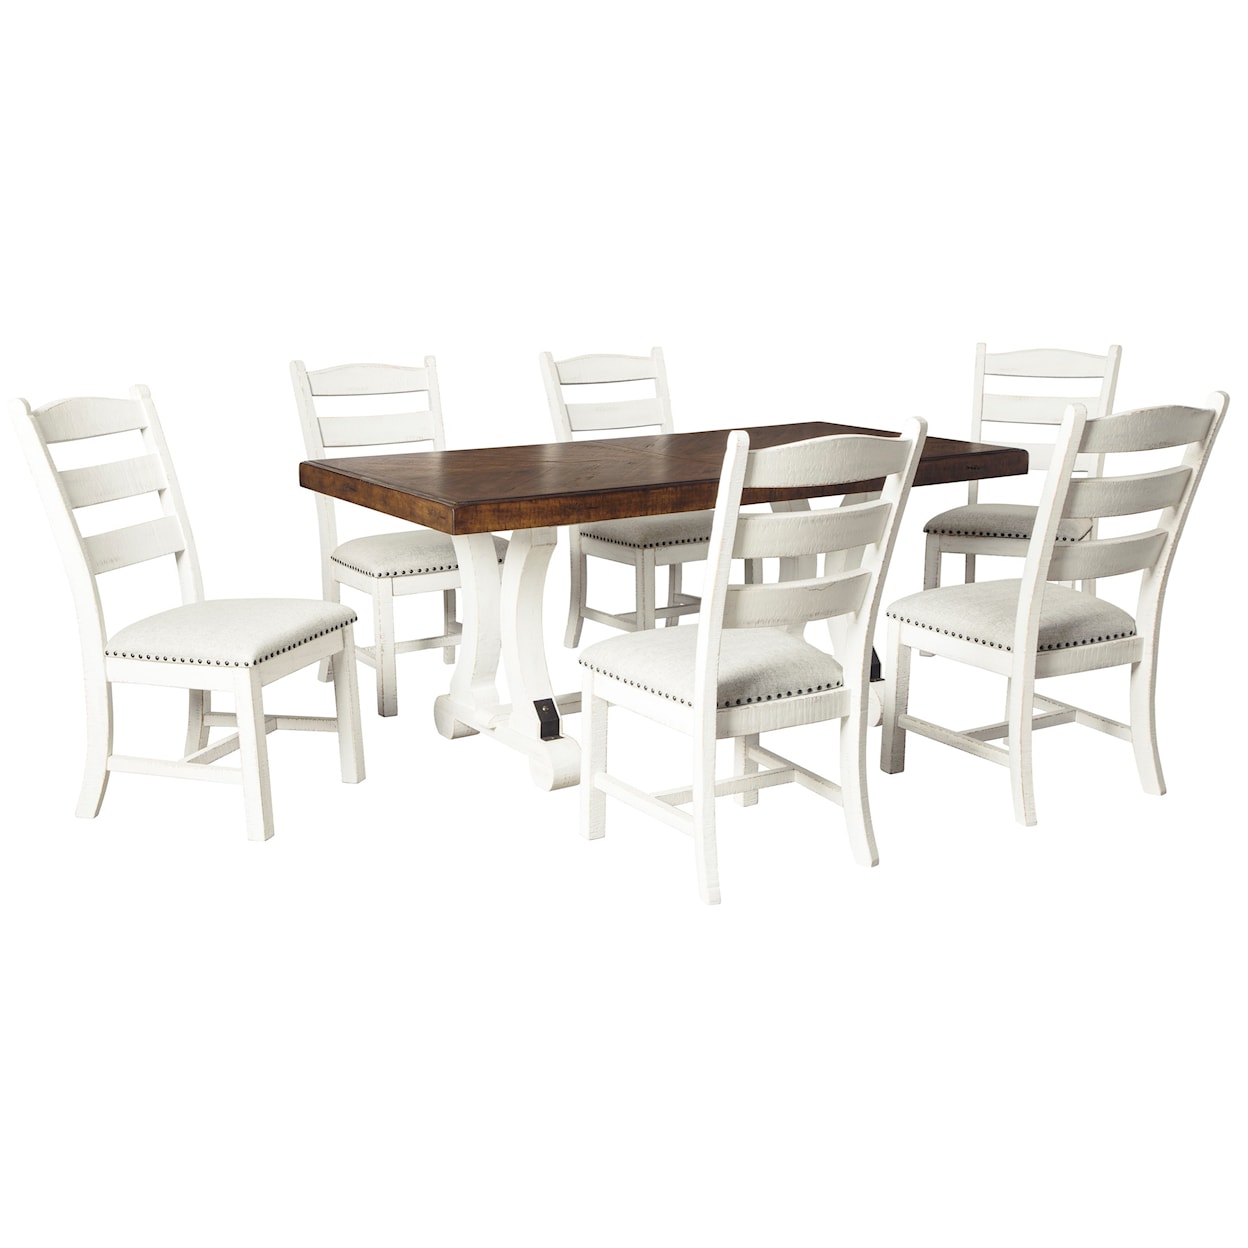 Ashley Furniture Signature Design Valebeck 7-Piece Table and Chair Set